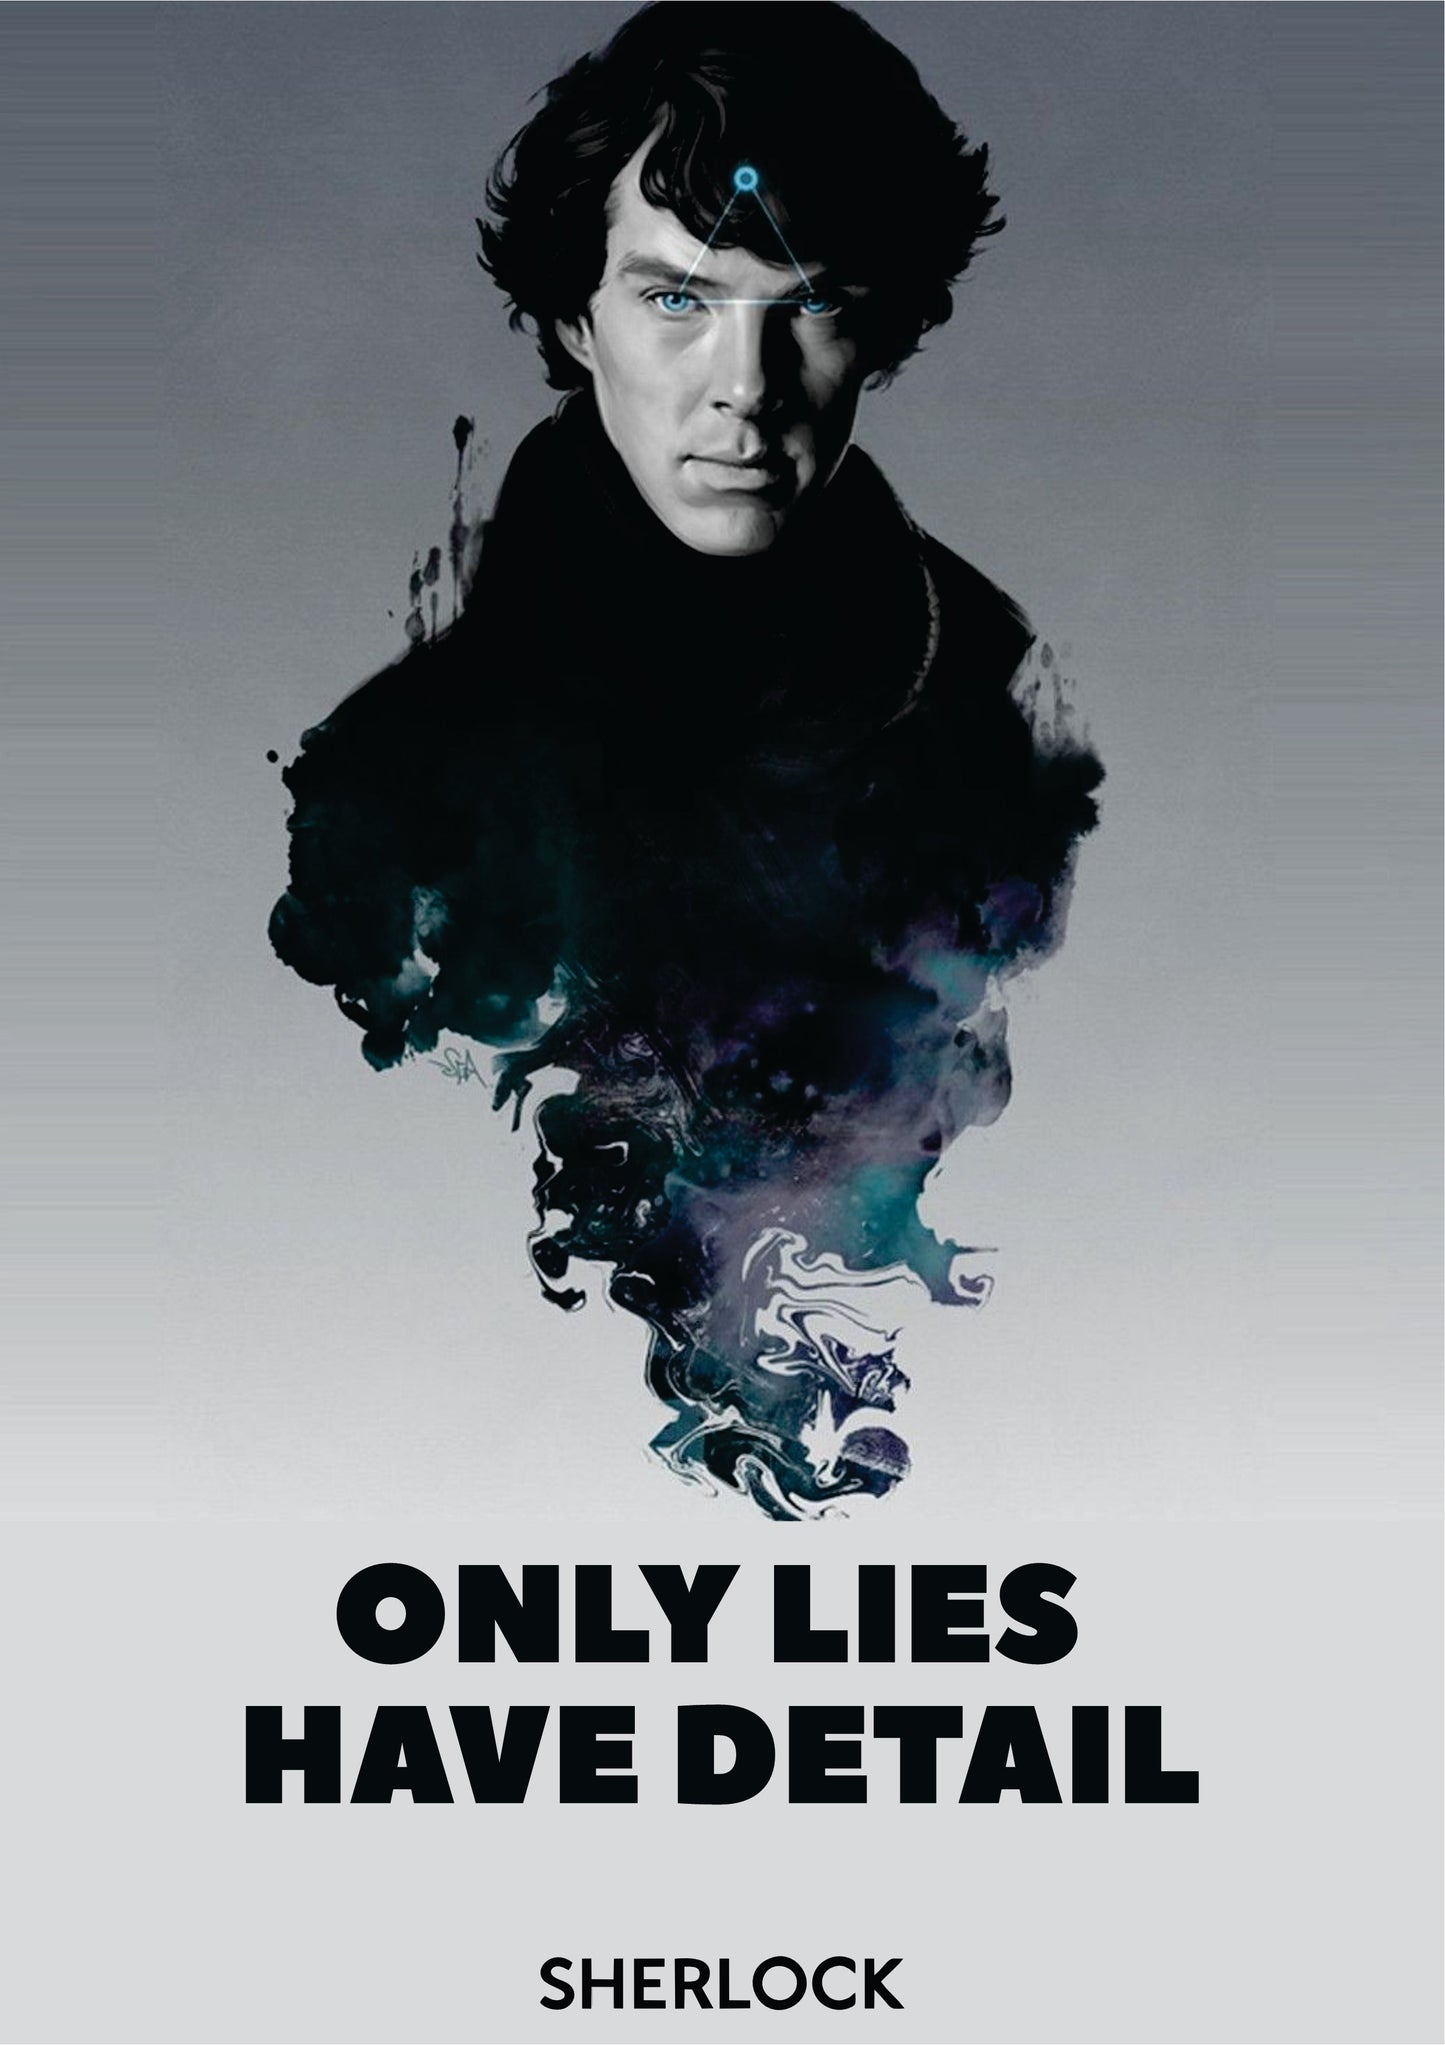 Sherlock - Only lies have detail